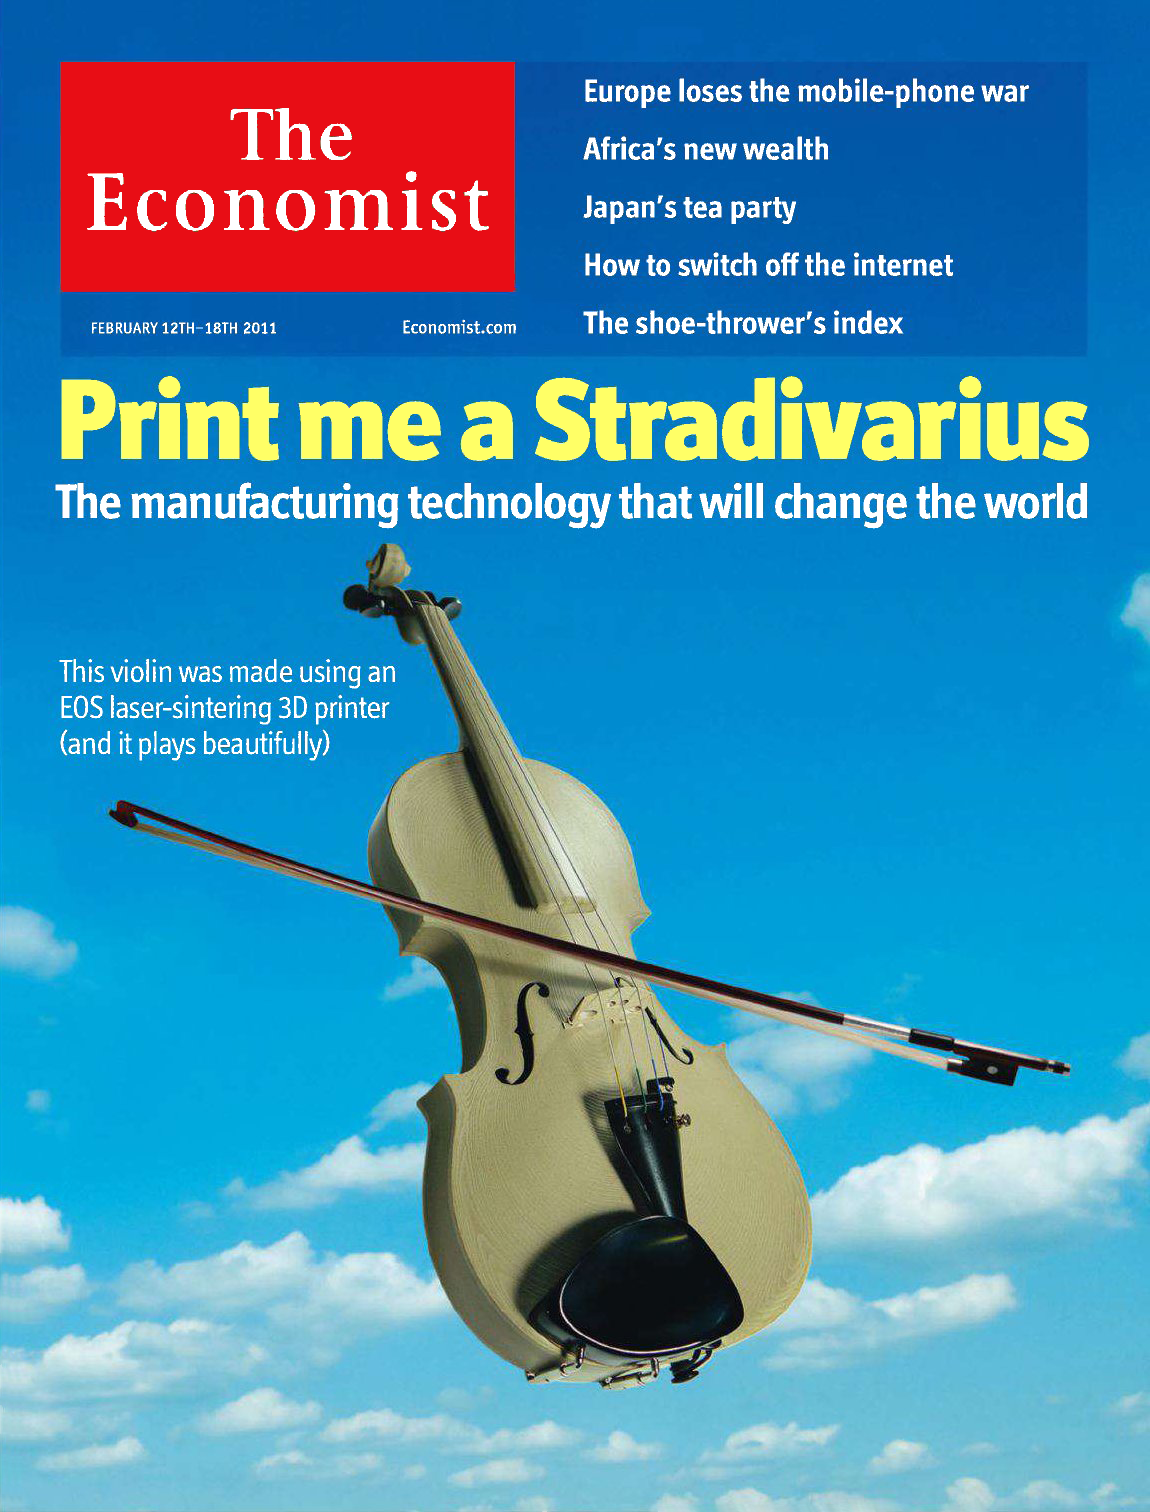 Cover of The Economist issue of November 6, 2010.